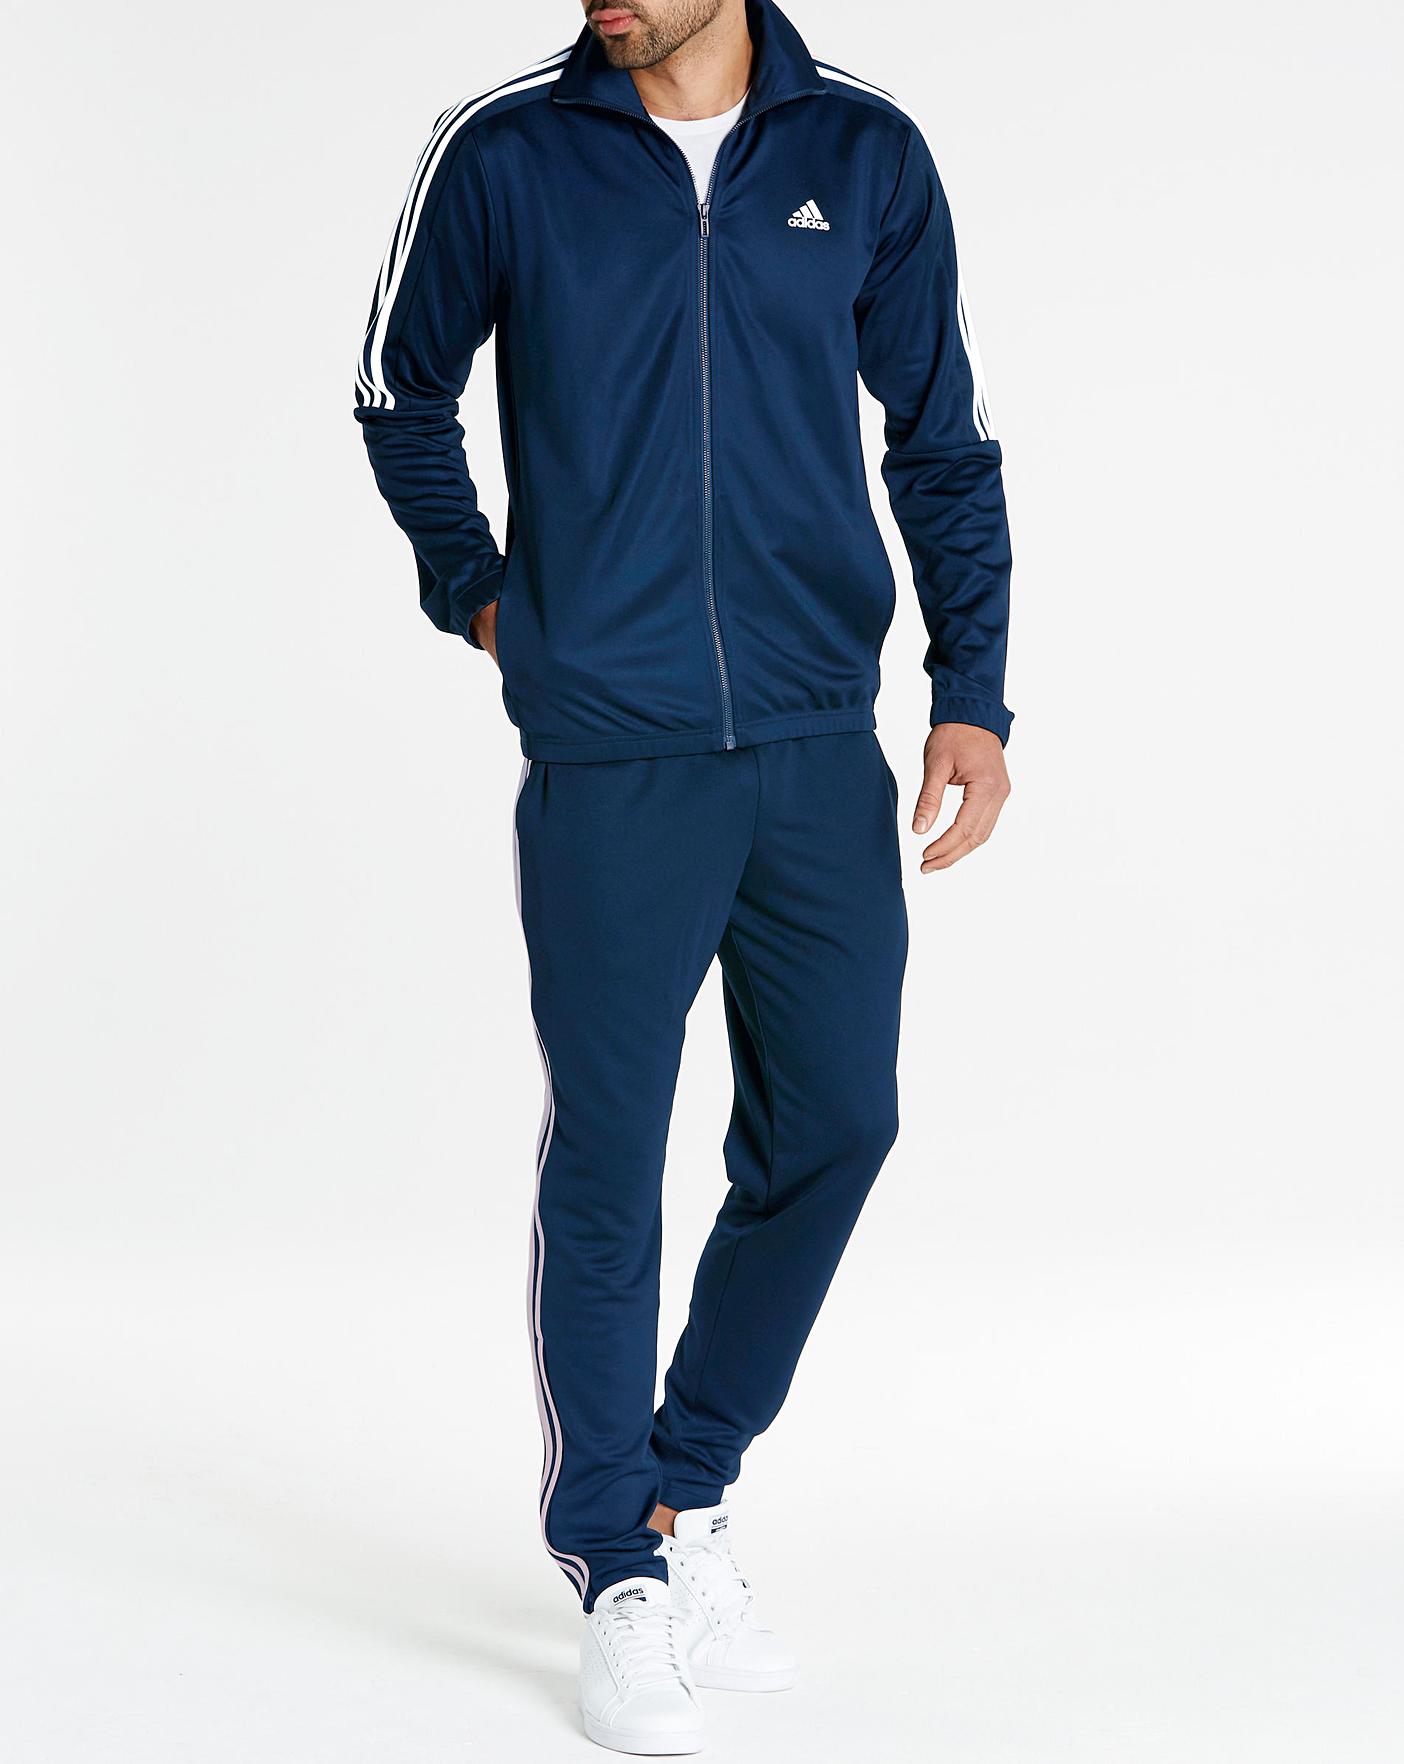 adidas tracksuit with vans